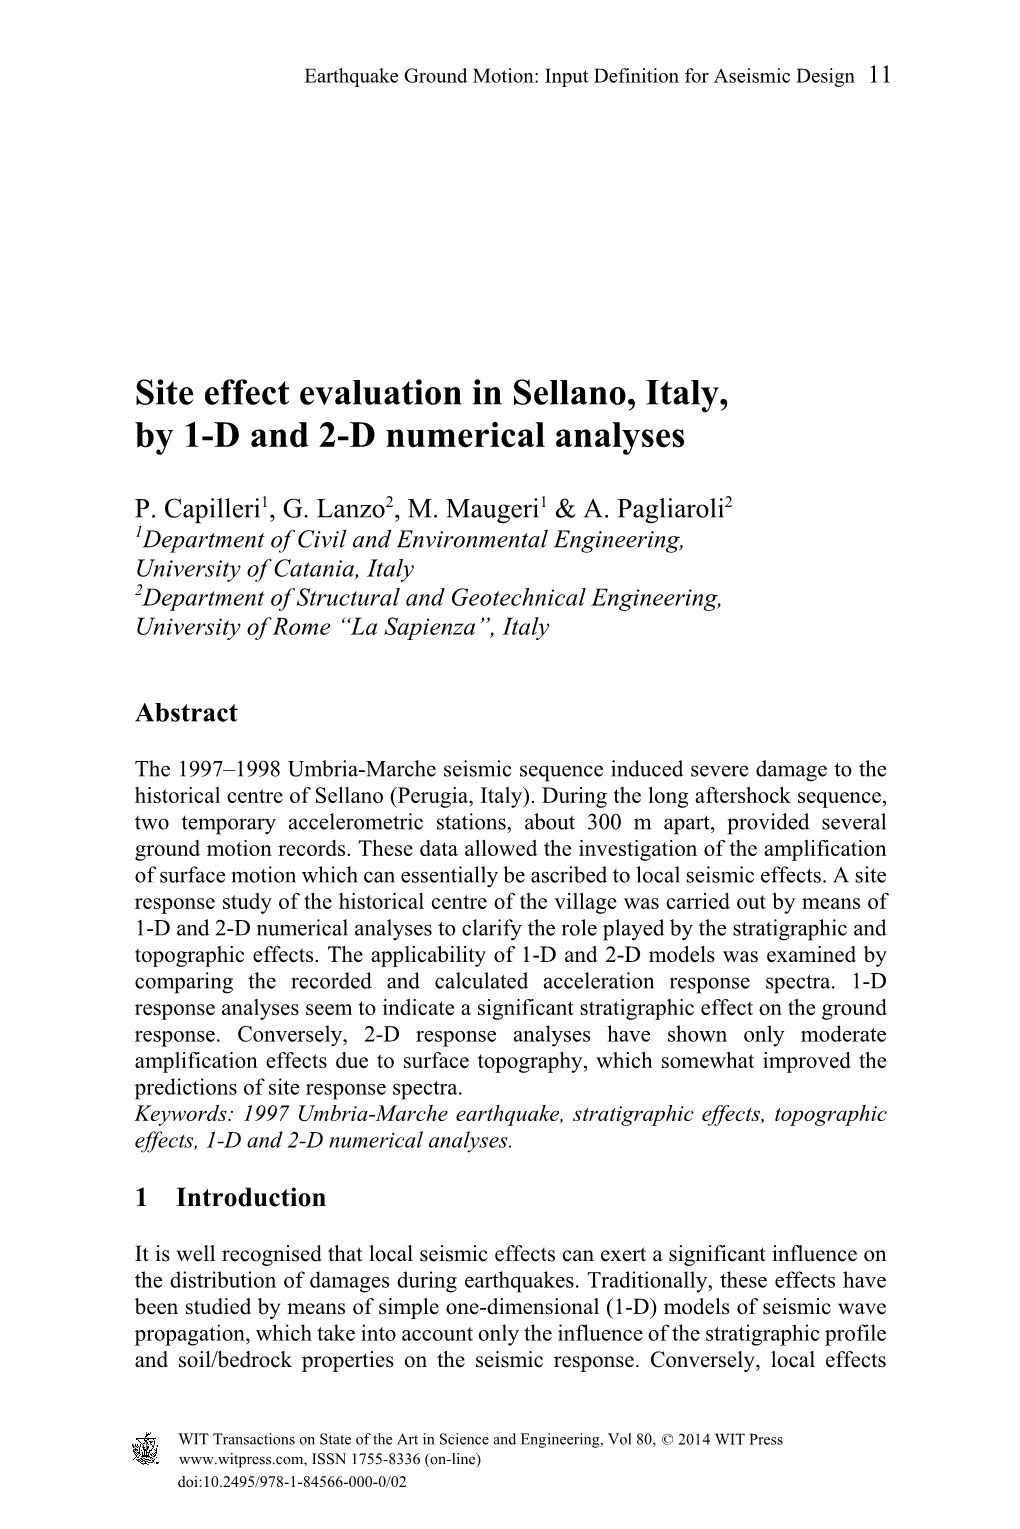 Site Effect Evaluation in Sellano, Italy, by 1-D and 2-D Numerical Analyses